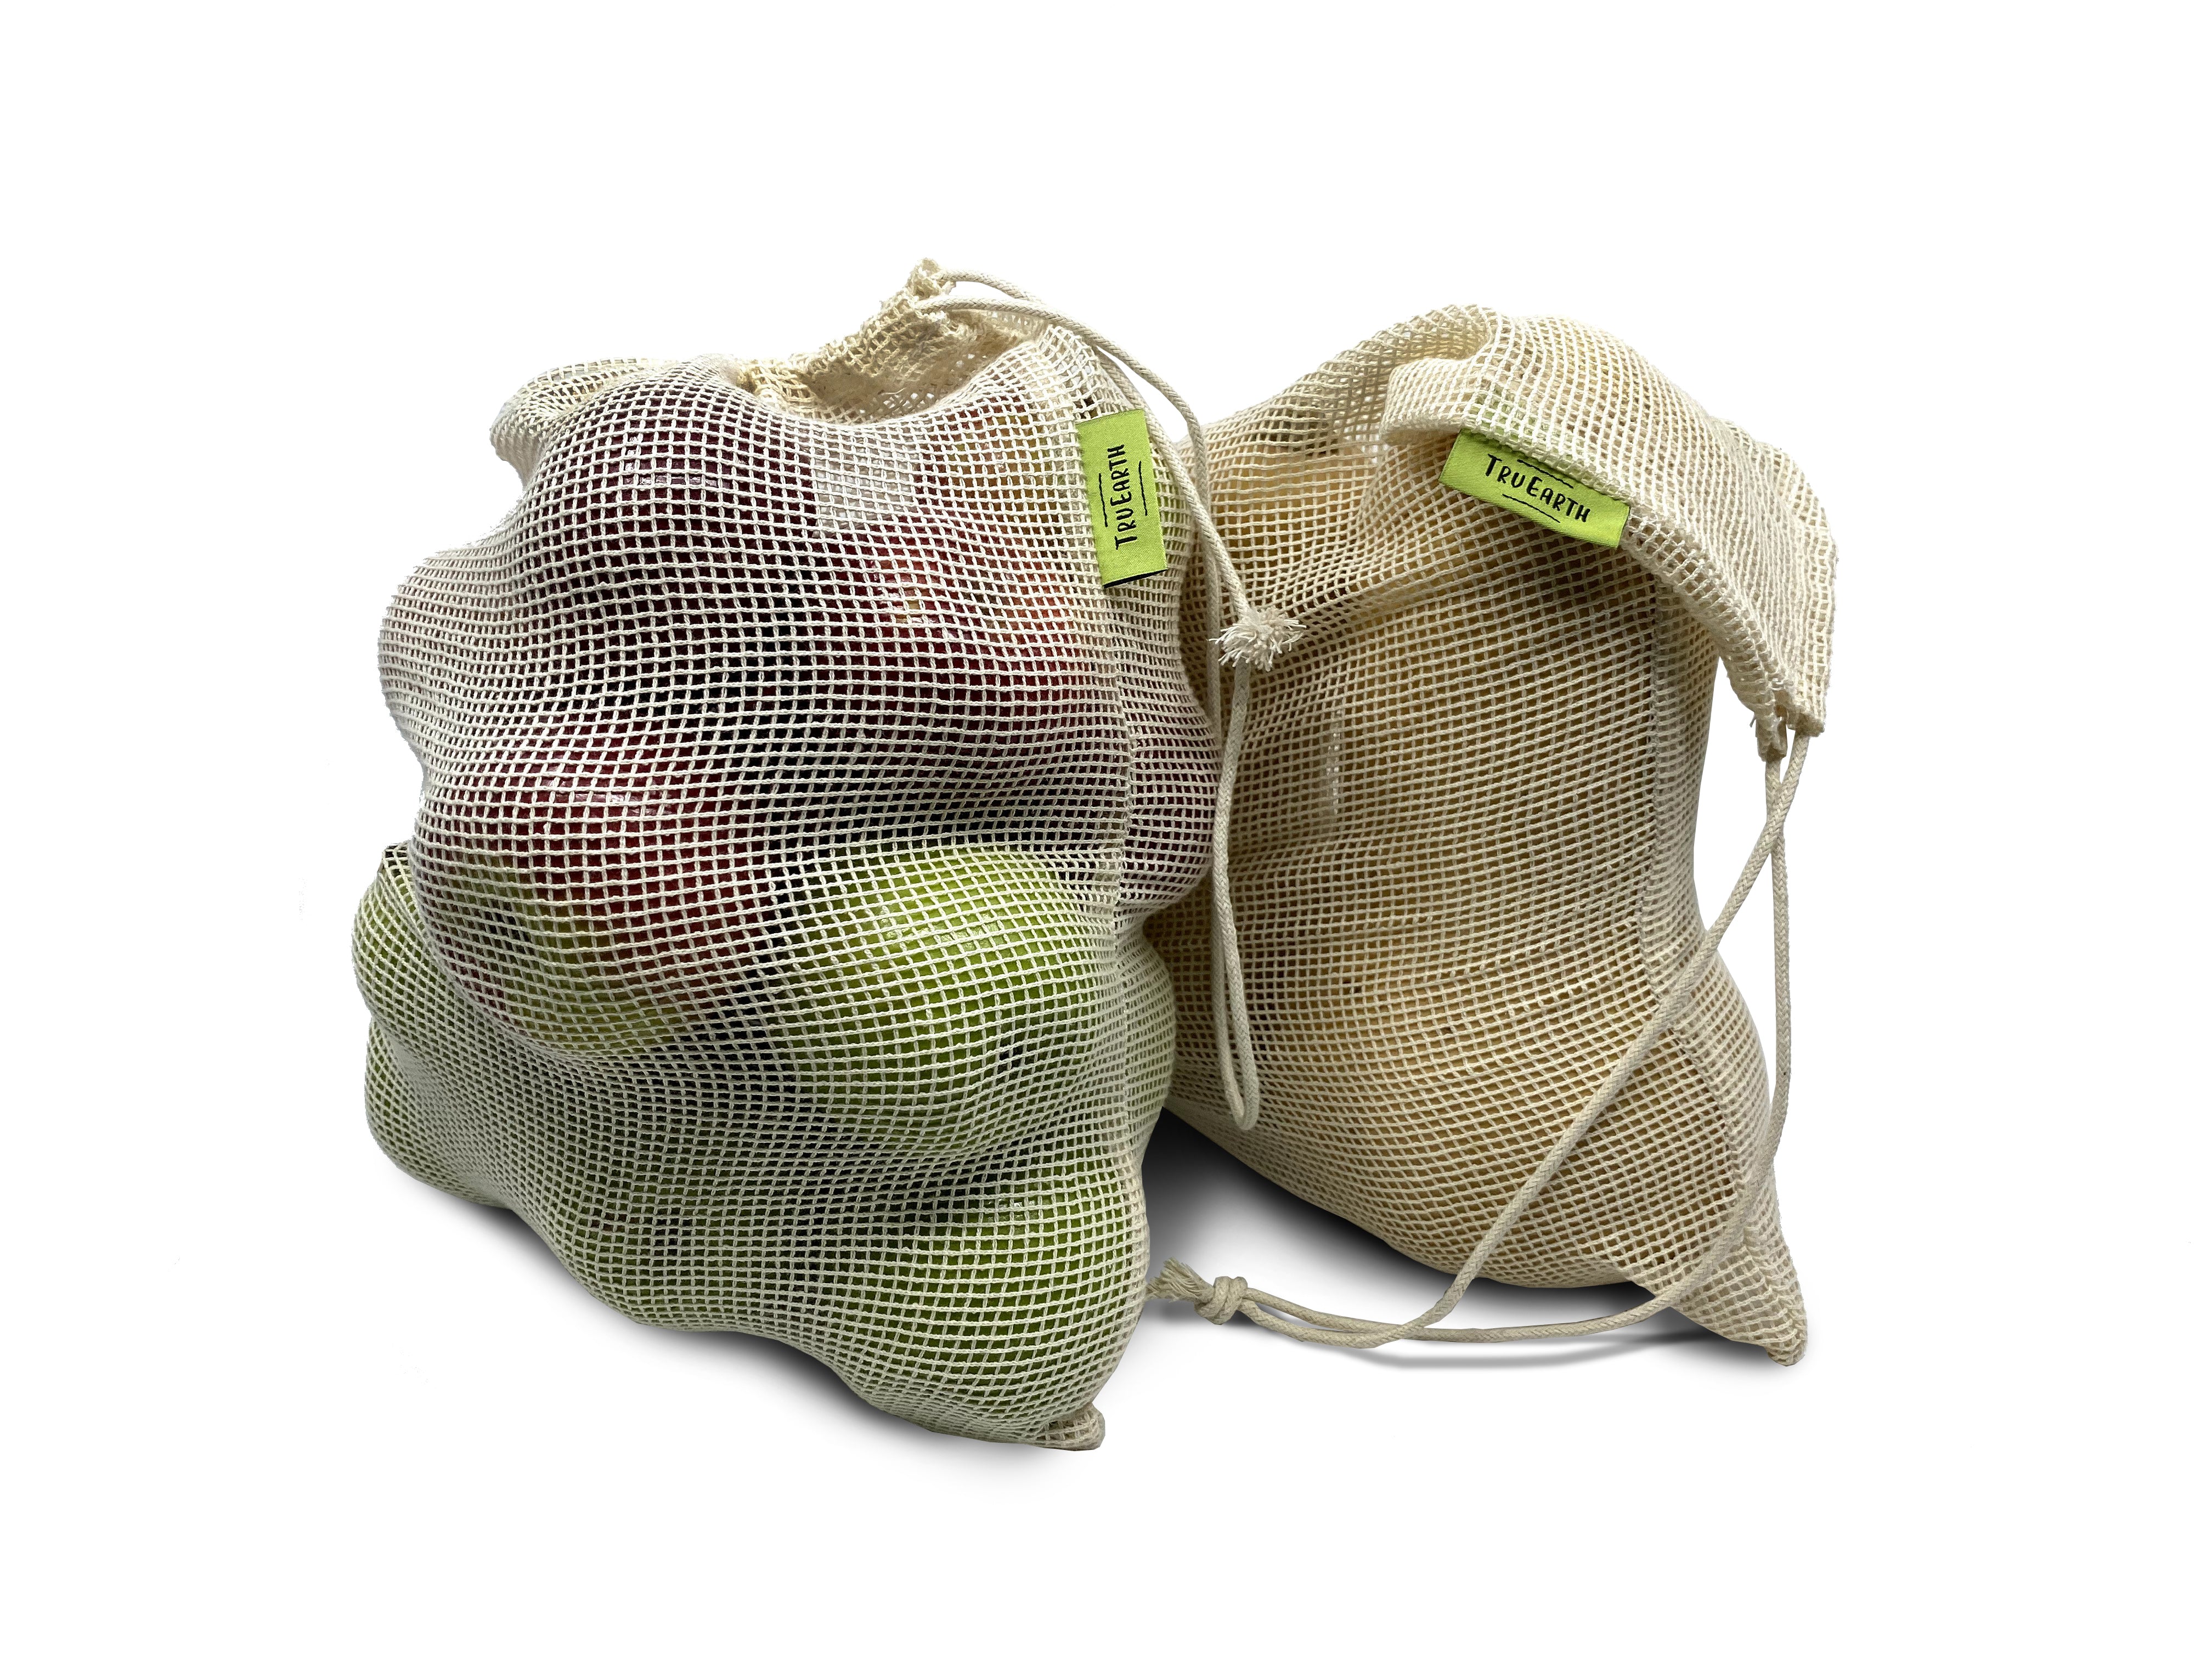 Reusable Produce Bags from Tru Earth for Sustainable Zero-Waste Grocery Shopping